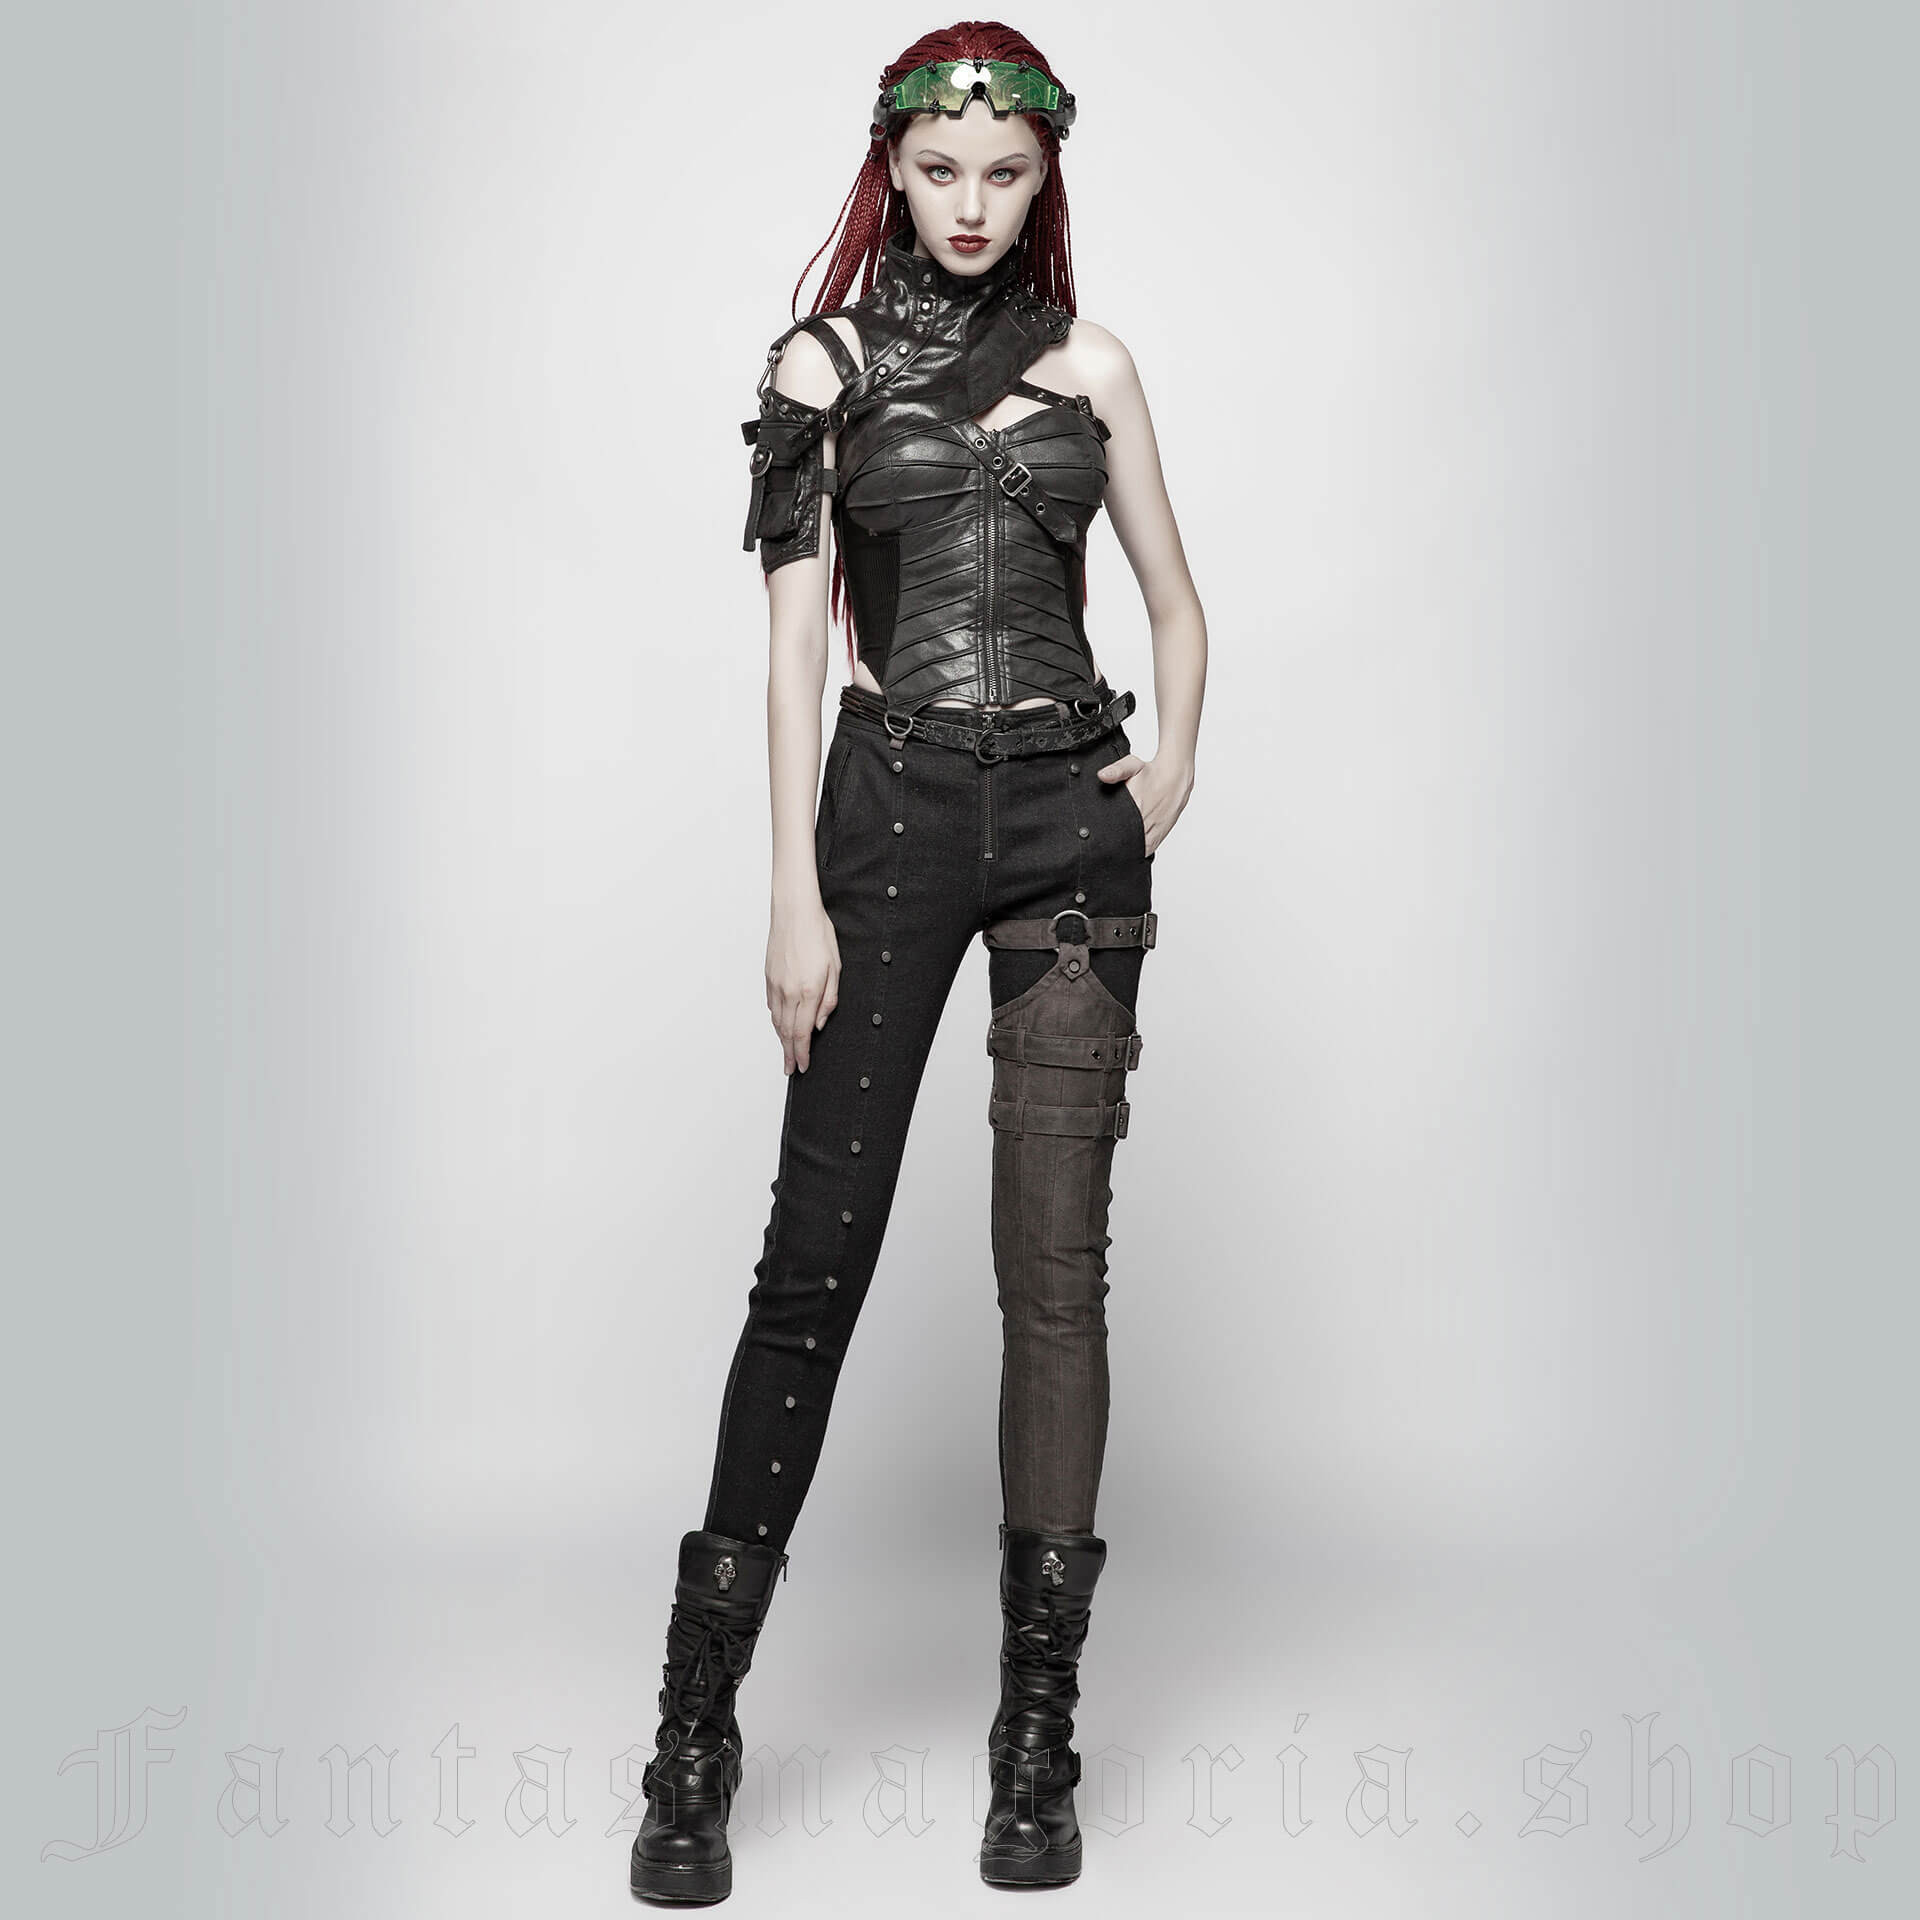 Punk Rave - Punk Rave new Gothic Industrial style spring – summer